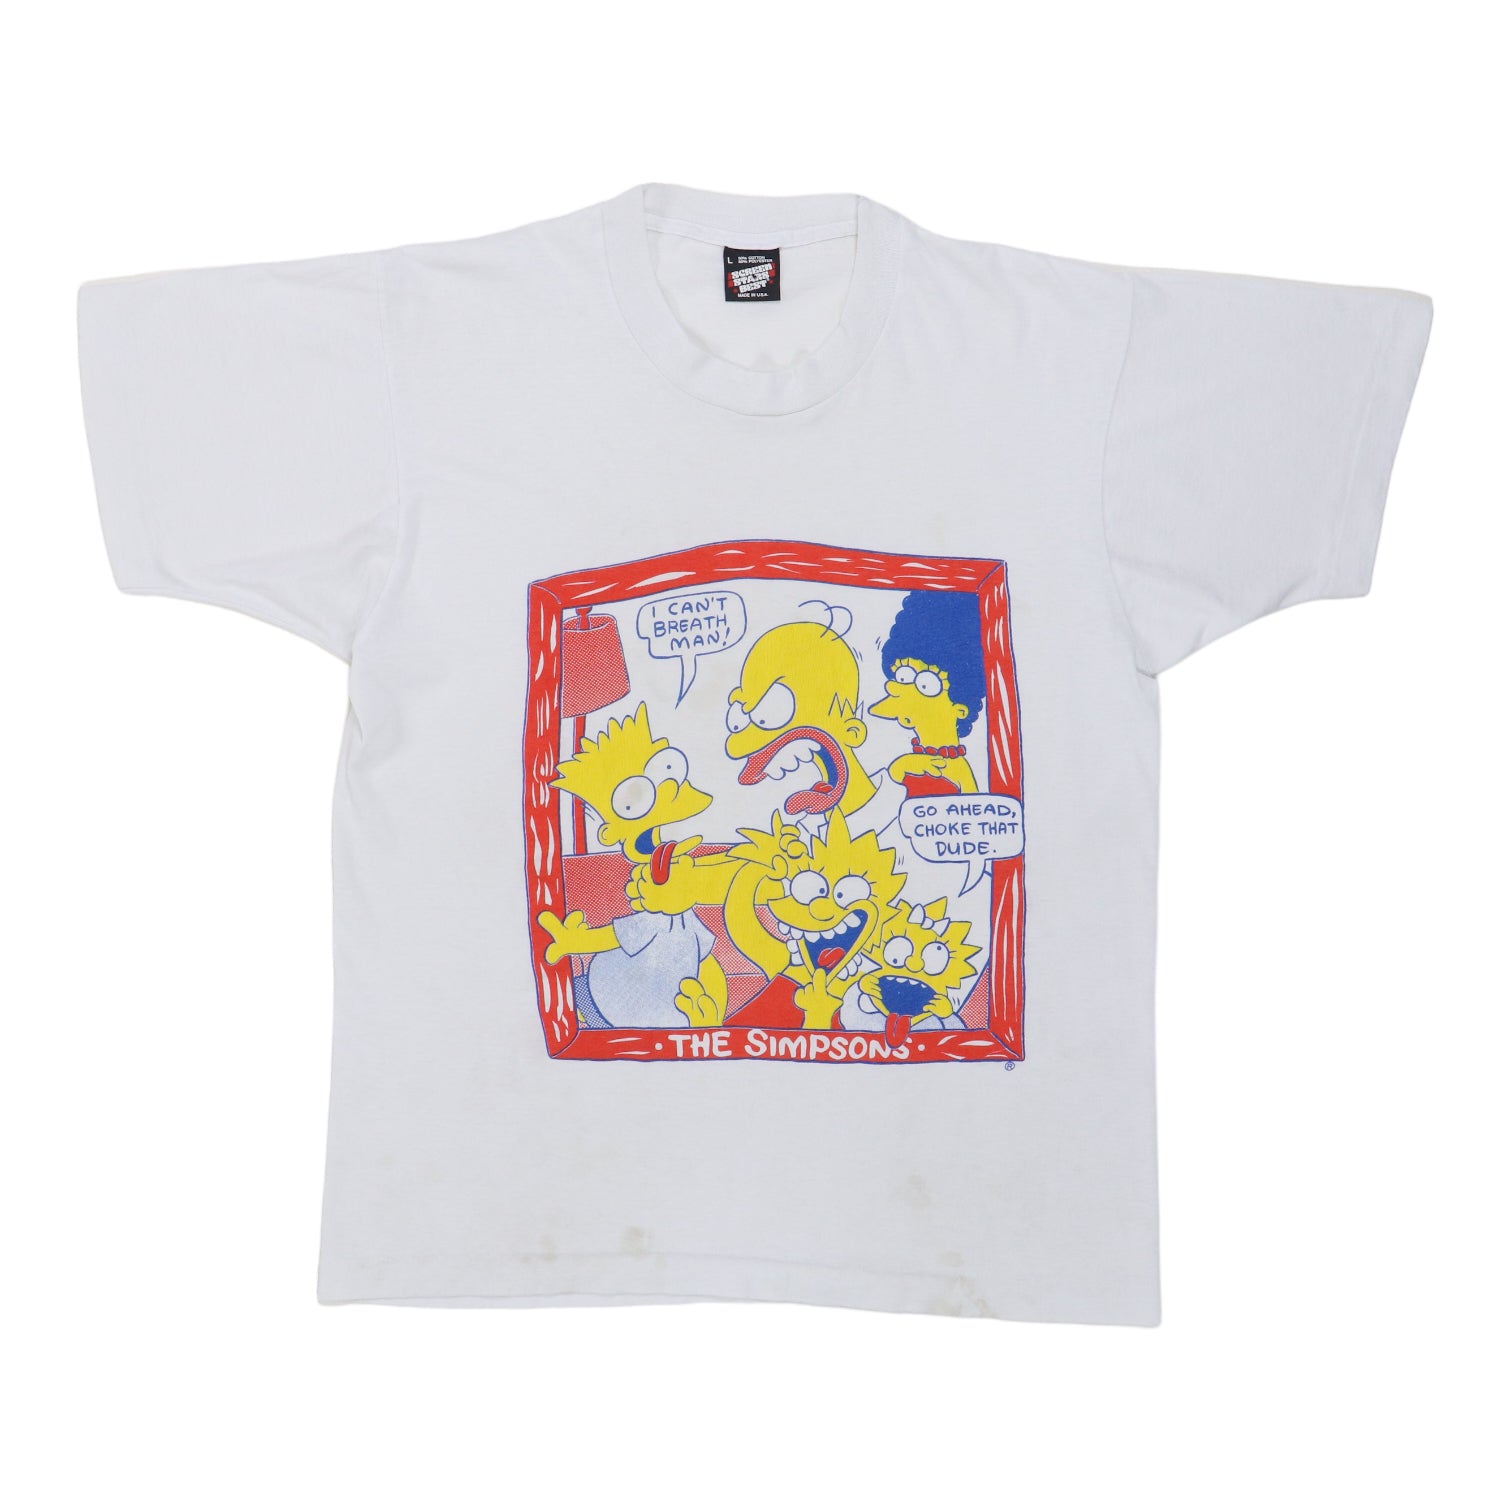 Wyco Vintage 1990s The Simpsons Shirt